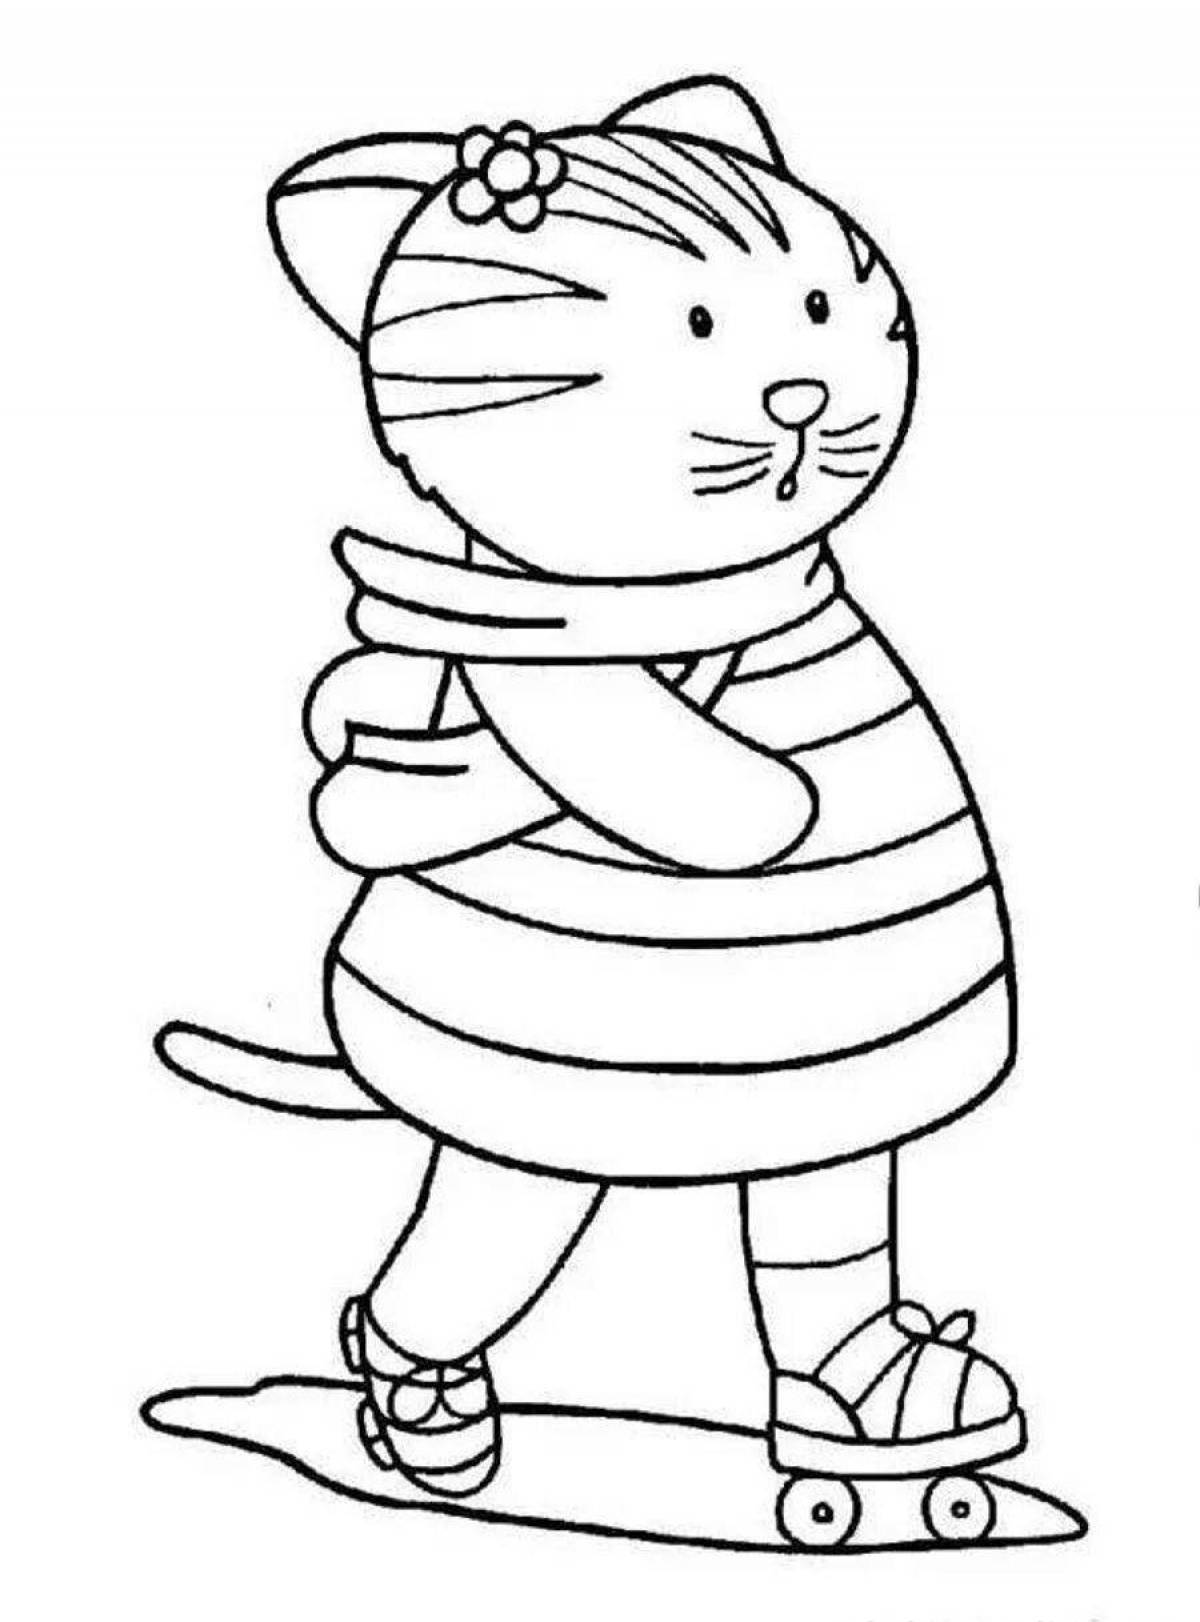 Fancy cat lily coloring page